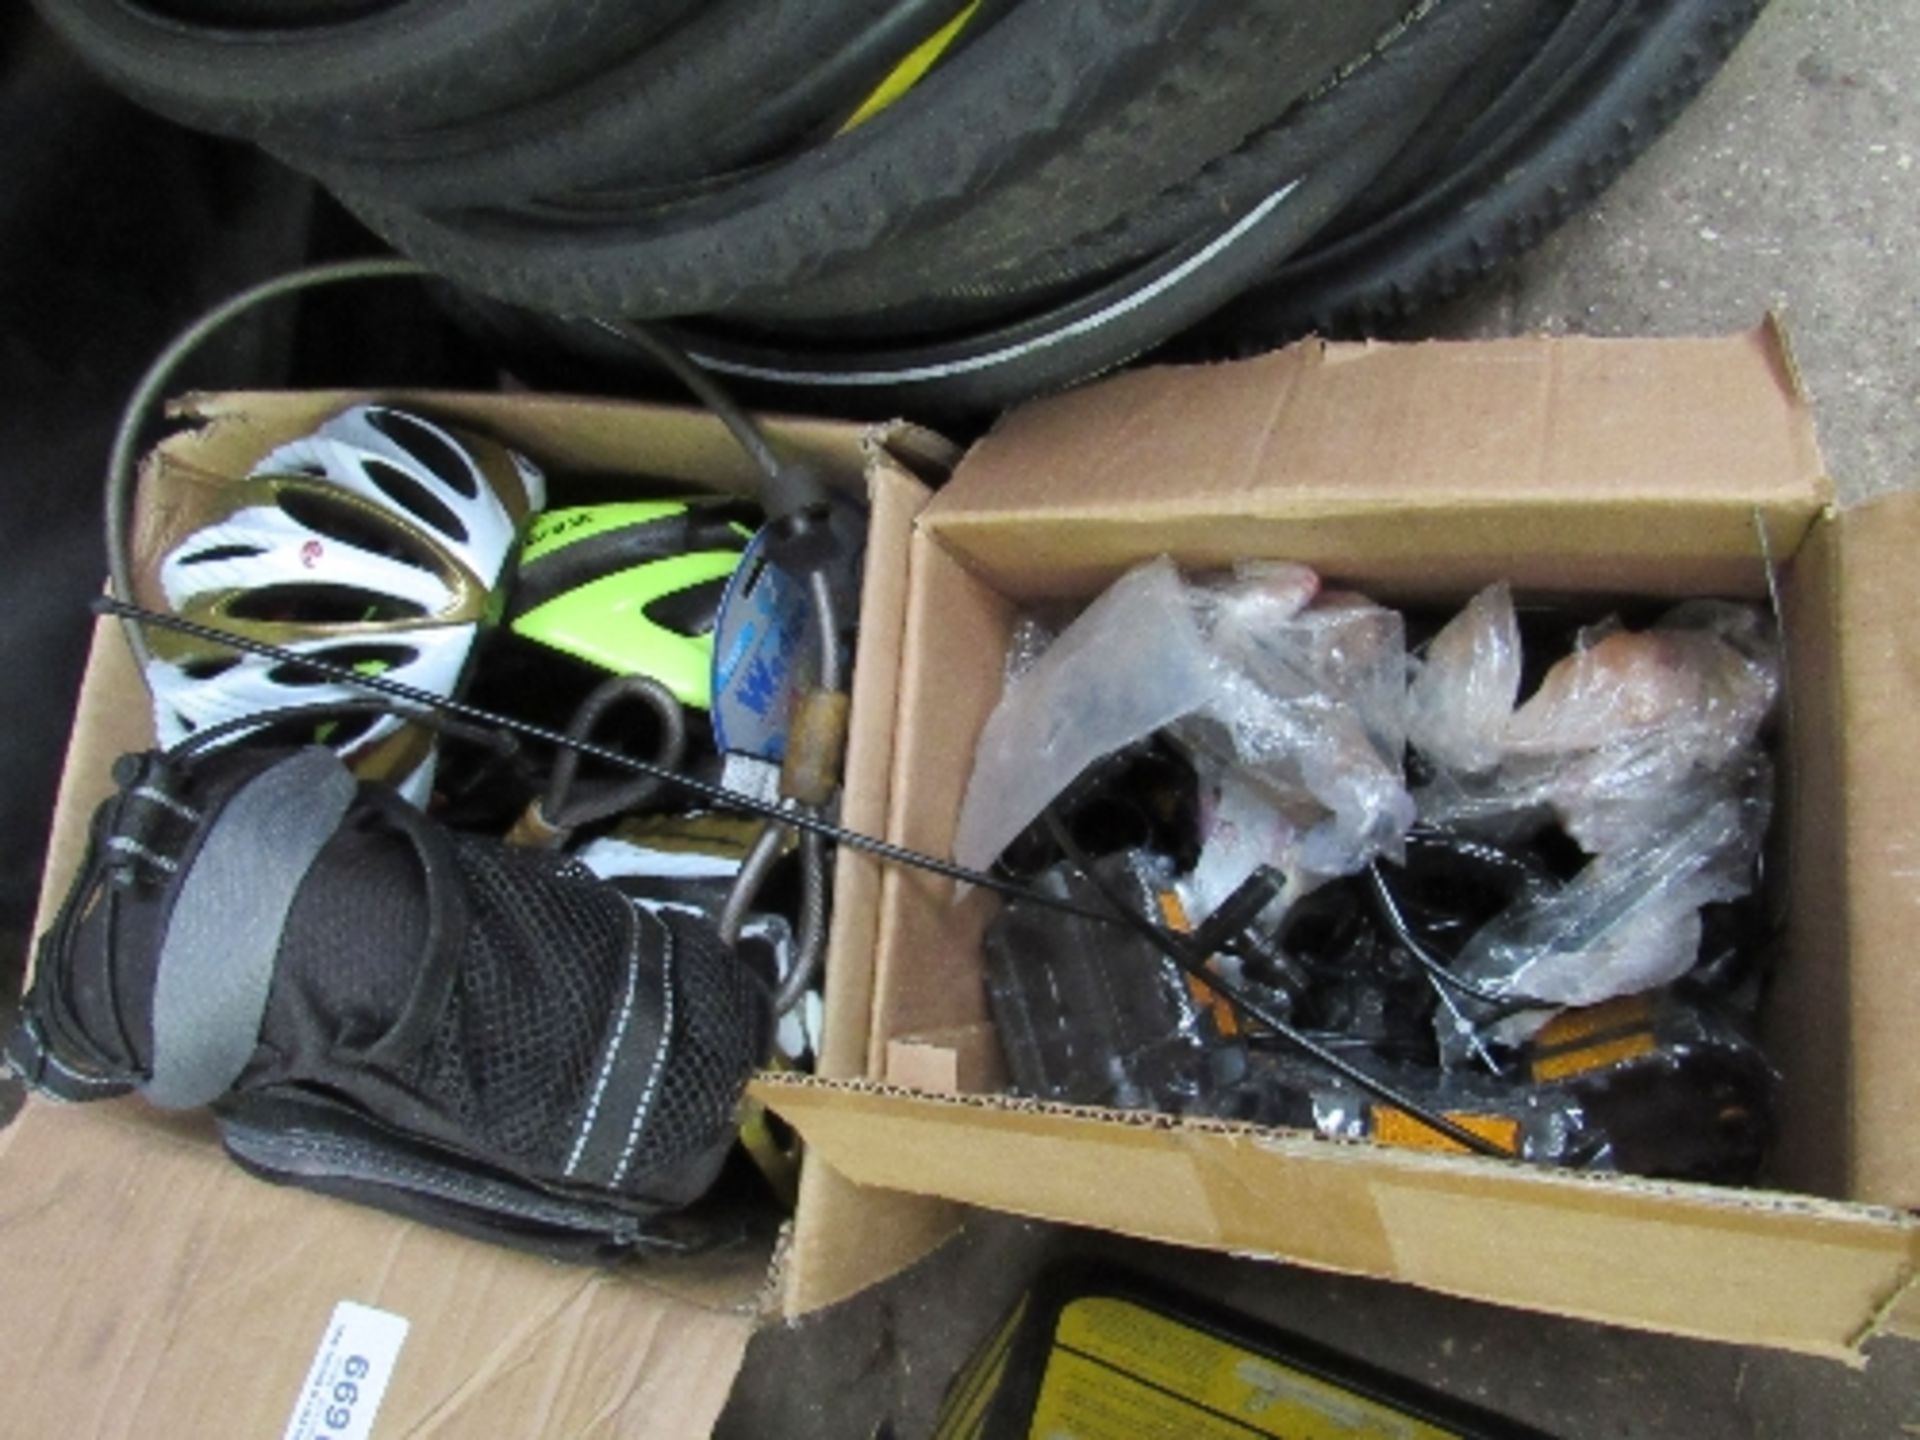 2 boxes of bike spares: helmets, pedals & brake cables